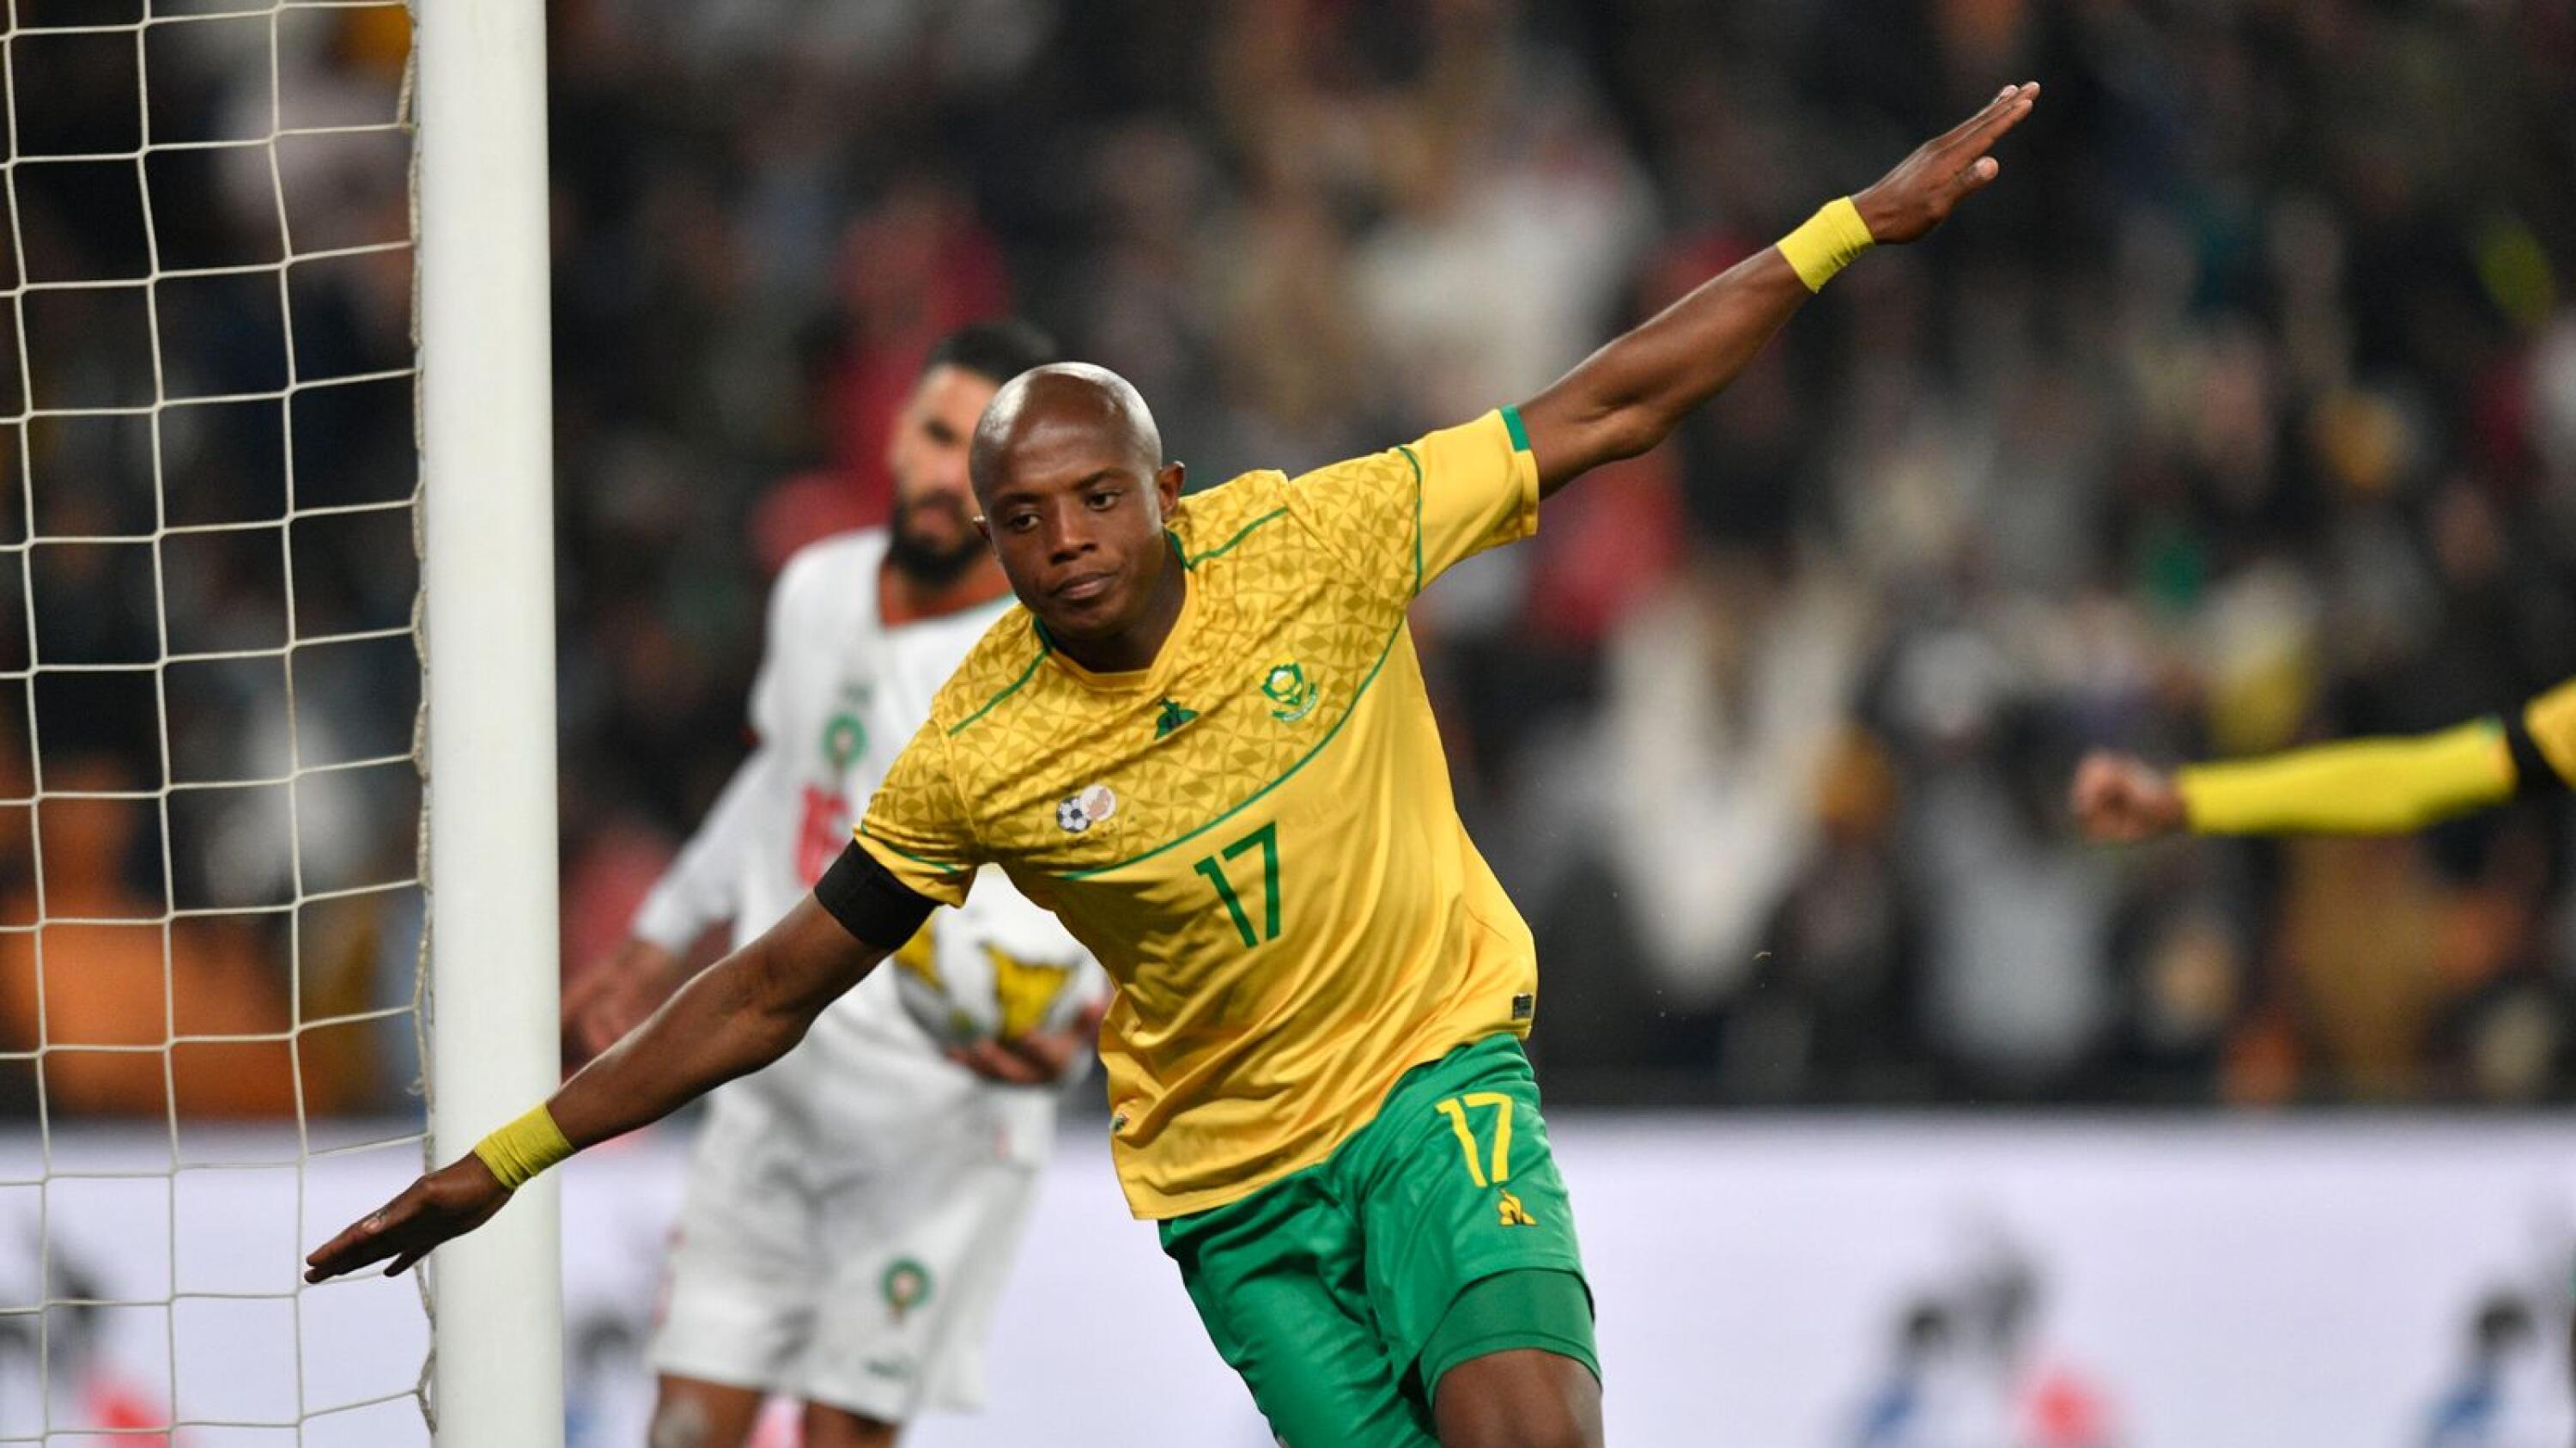 Bafana Bafana’s Zakhele Lepasa celebrates after scoring their second goal during their Africa Cup of Nations qualifier against Morocco at FNB Stadium in Johannesburg on Saturday